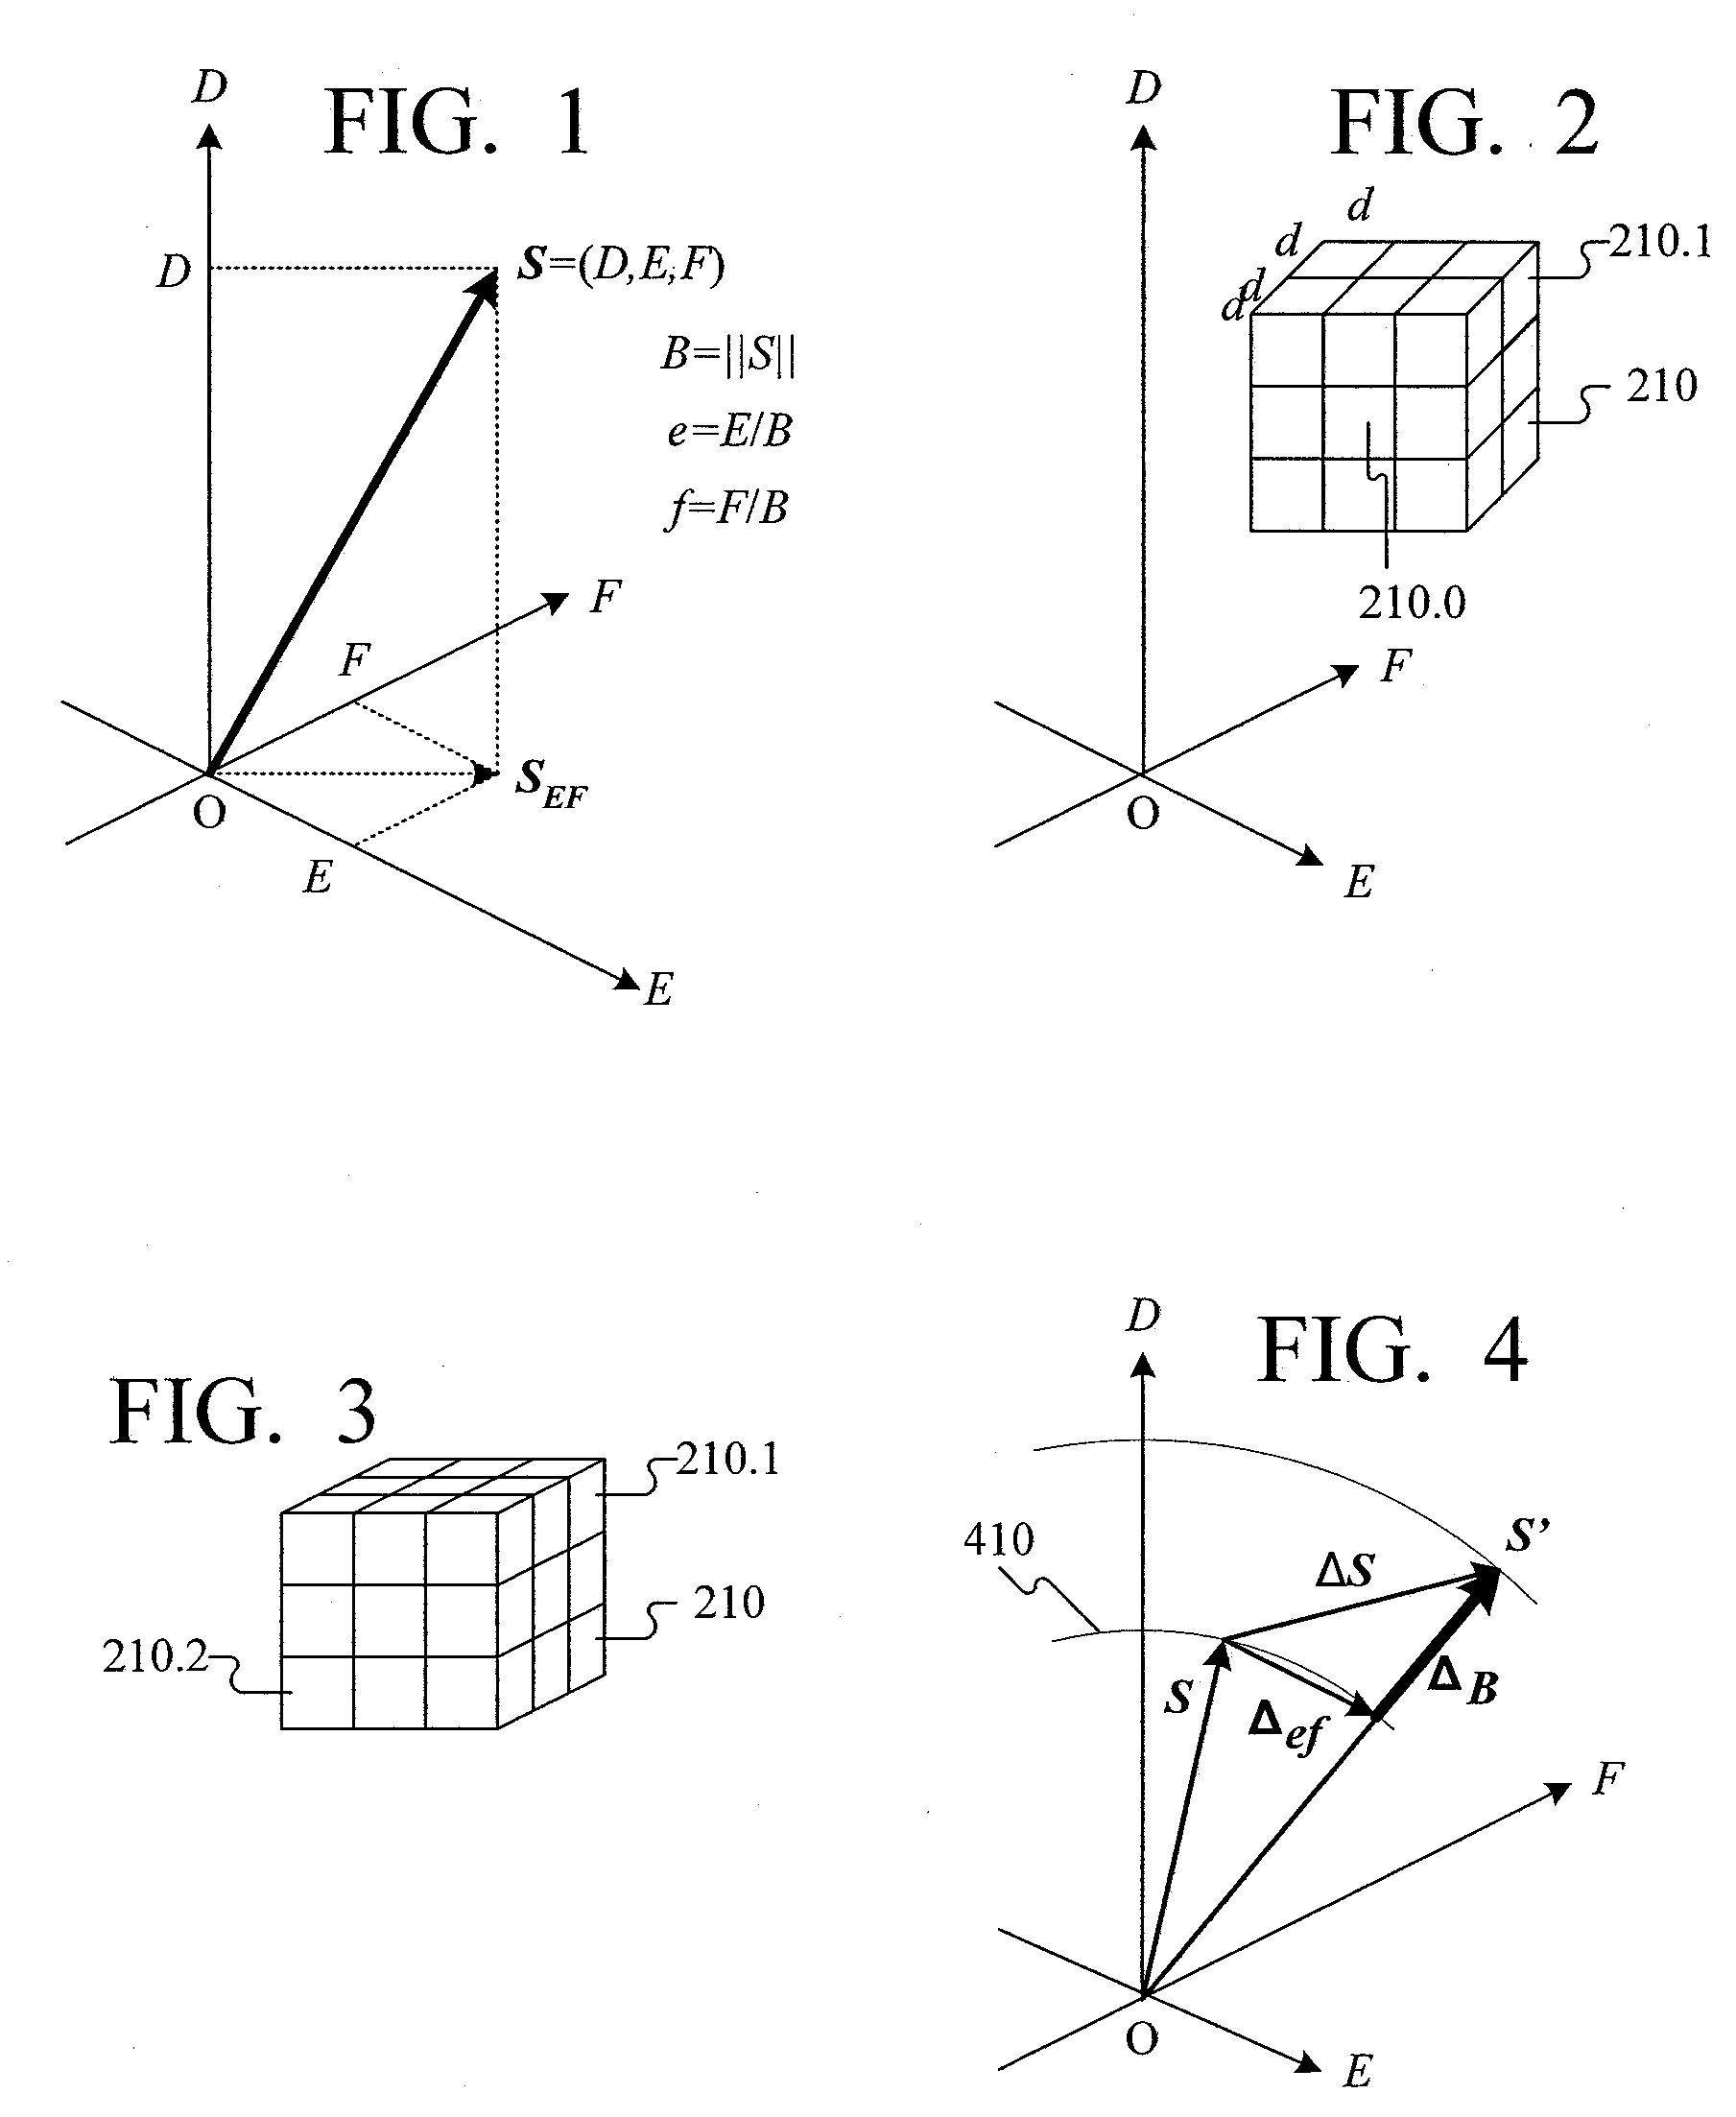 Color quantization based on desired upper bound for relative quantization step